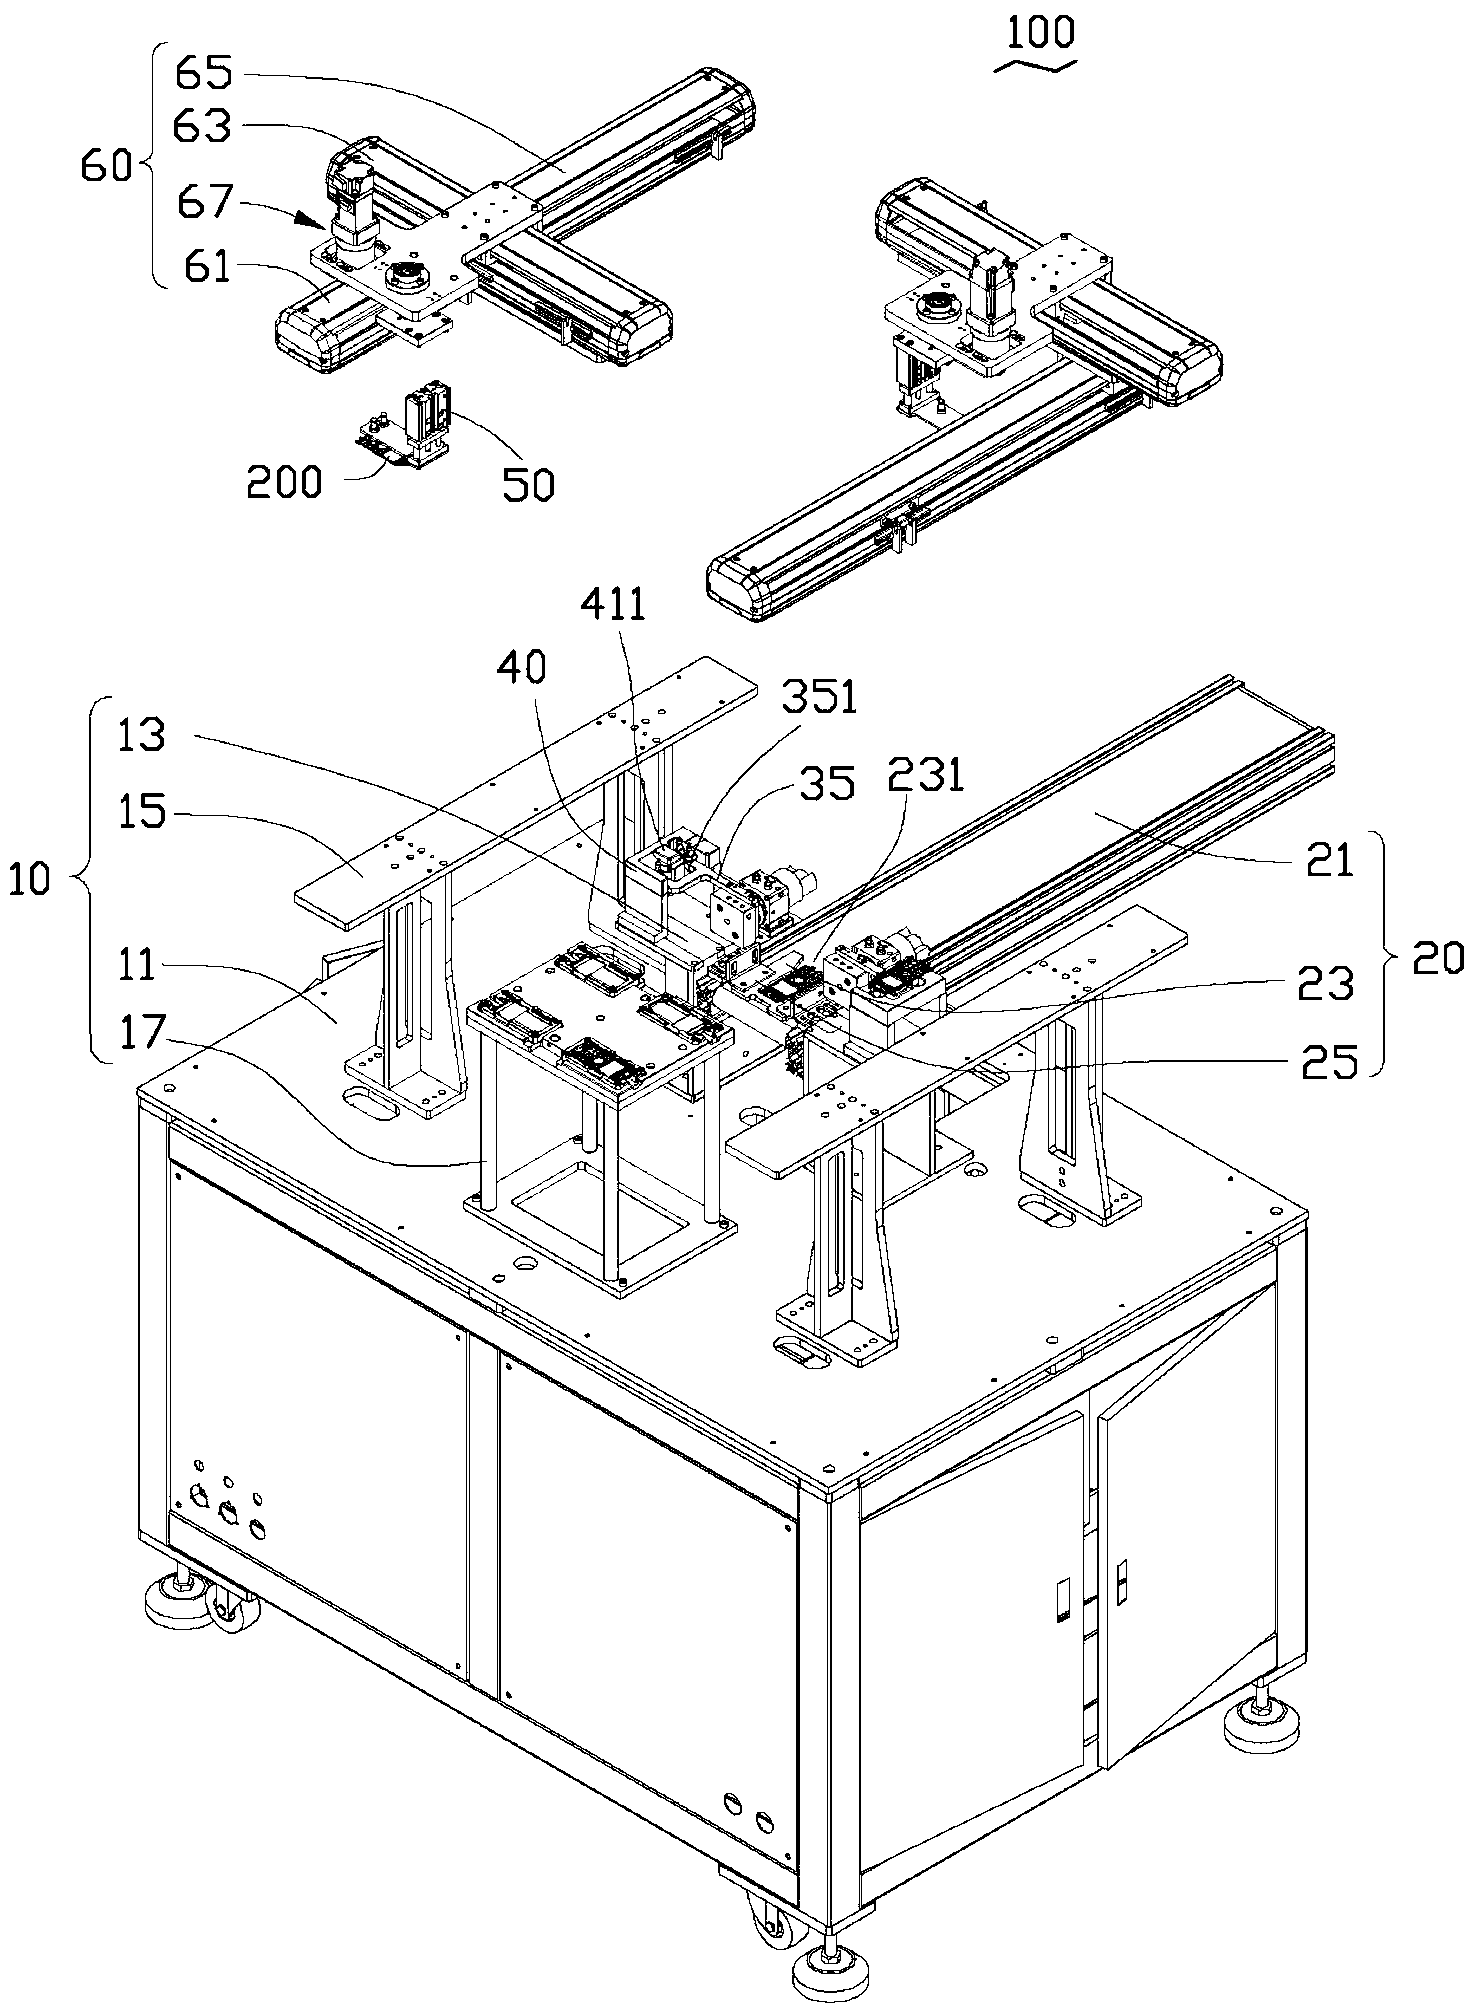 Automatic material taking apparatus